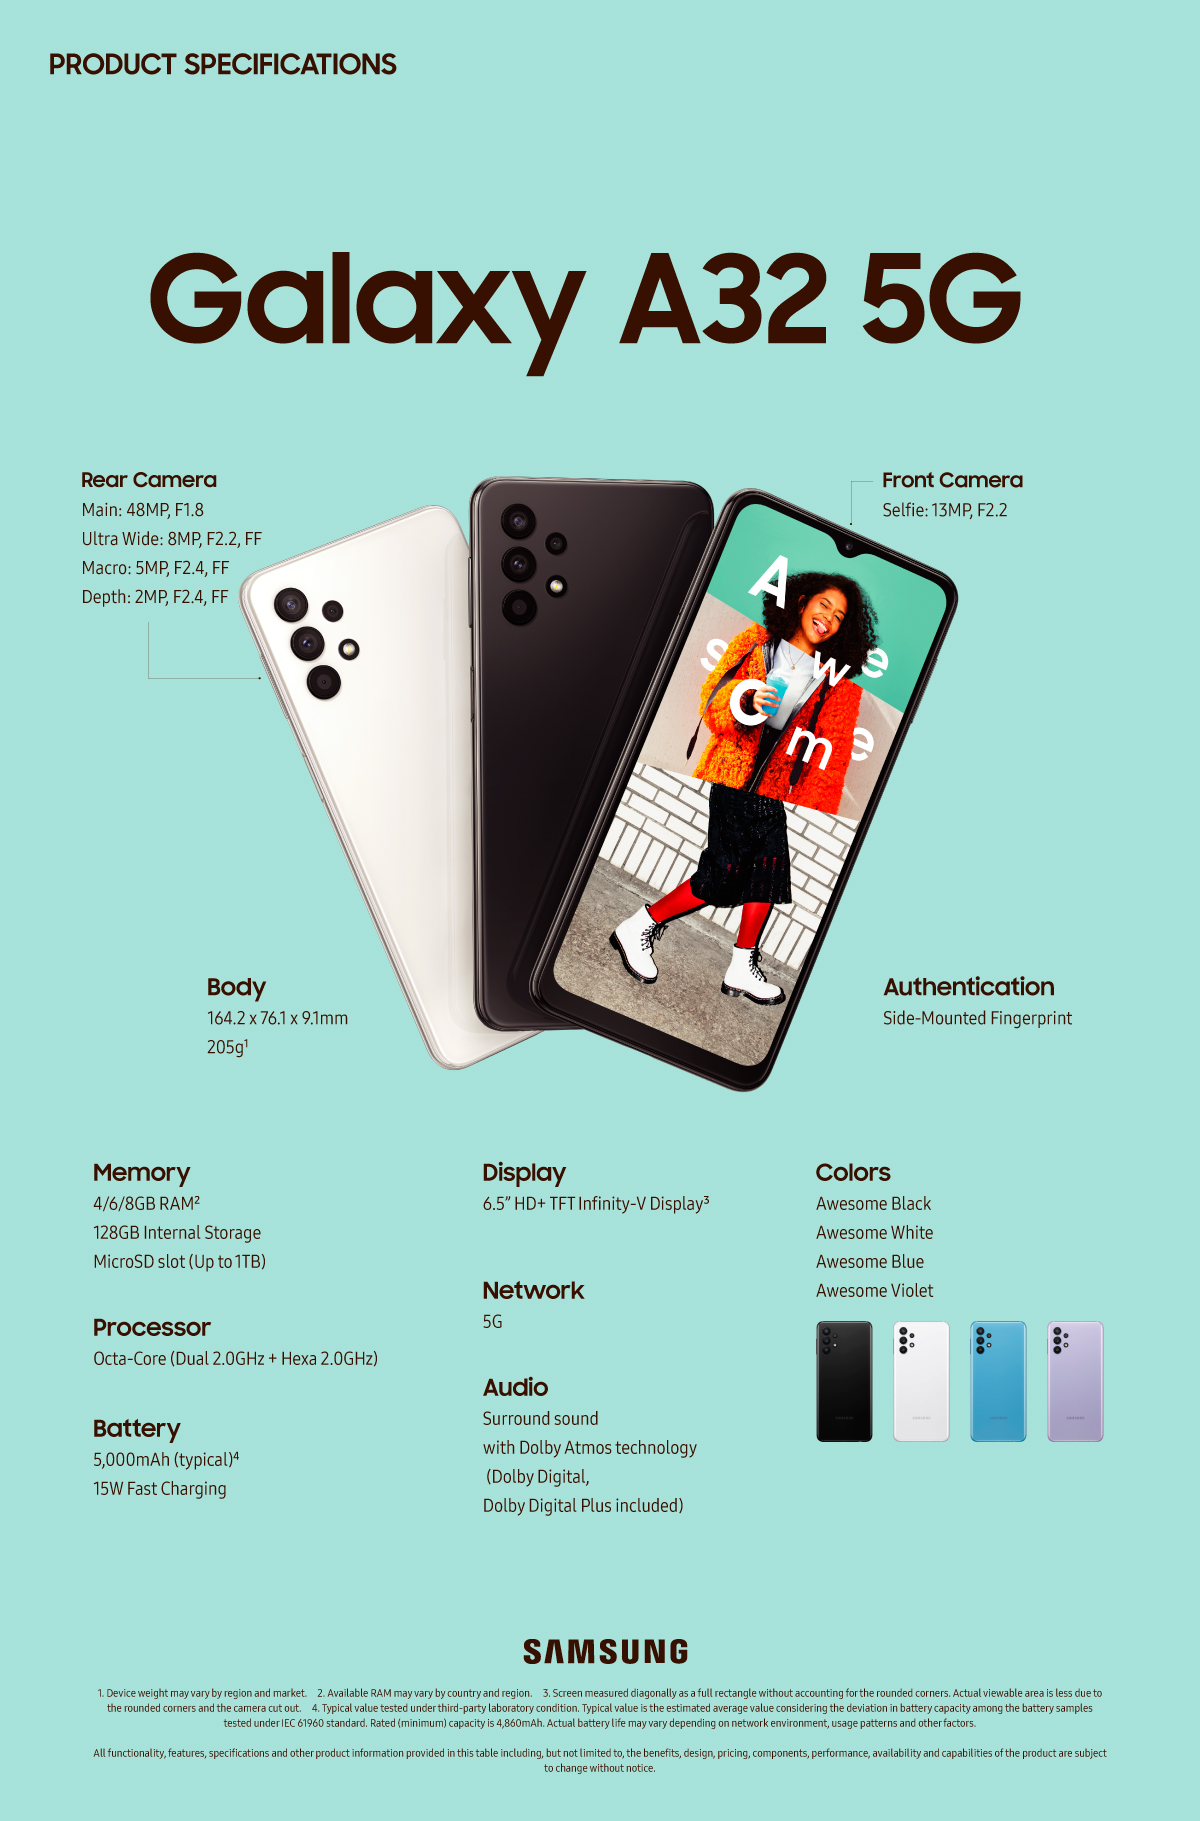 Specs] Galaxy A32 5G Delivers Awesome Power in an Iconic Design – Samsung  Mobile Press